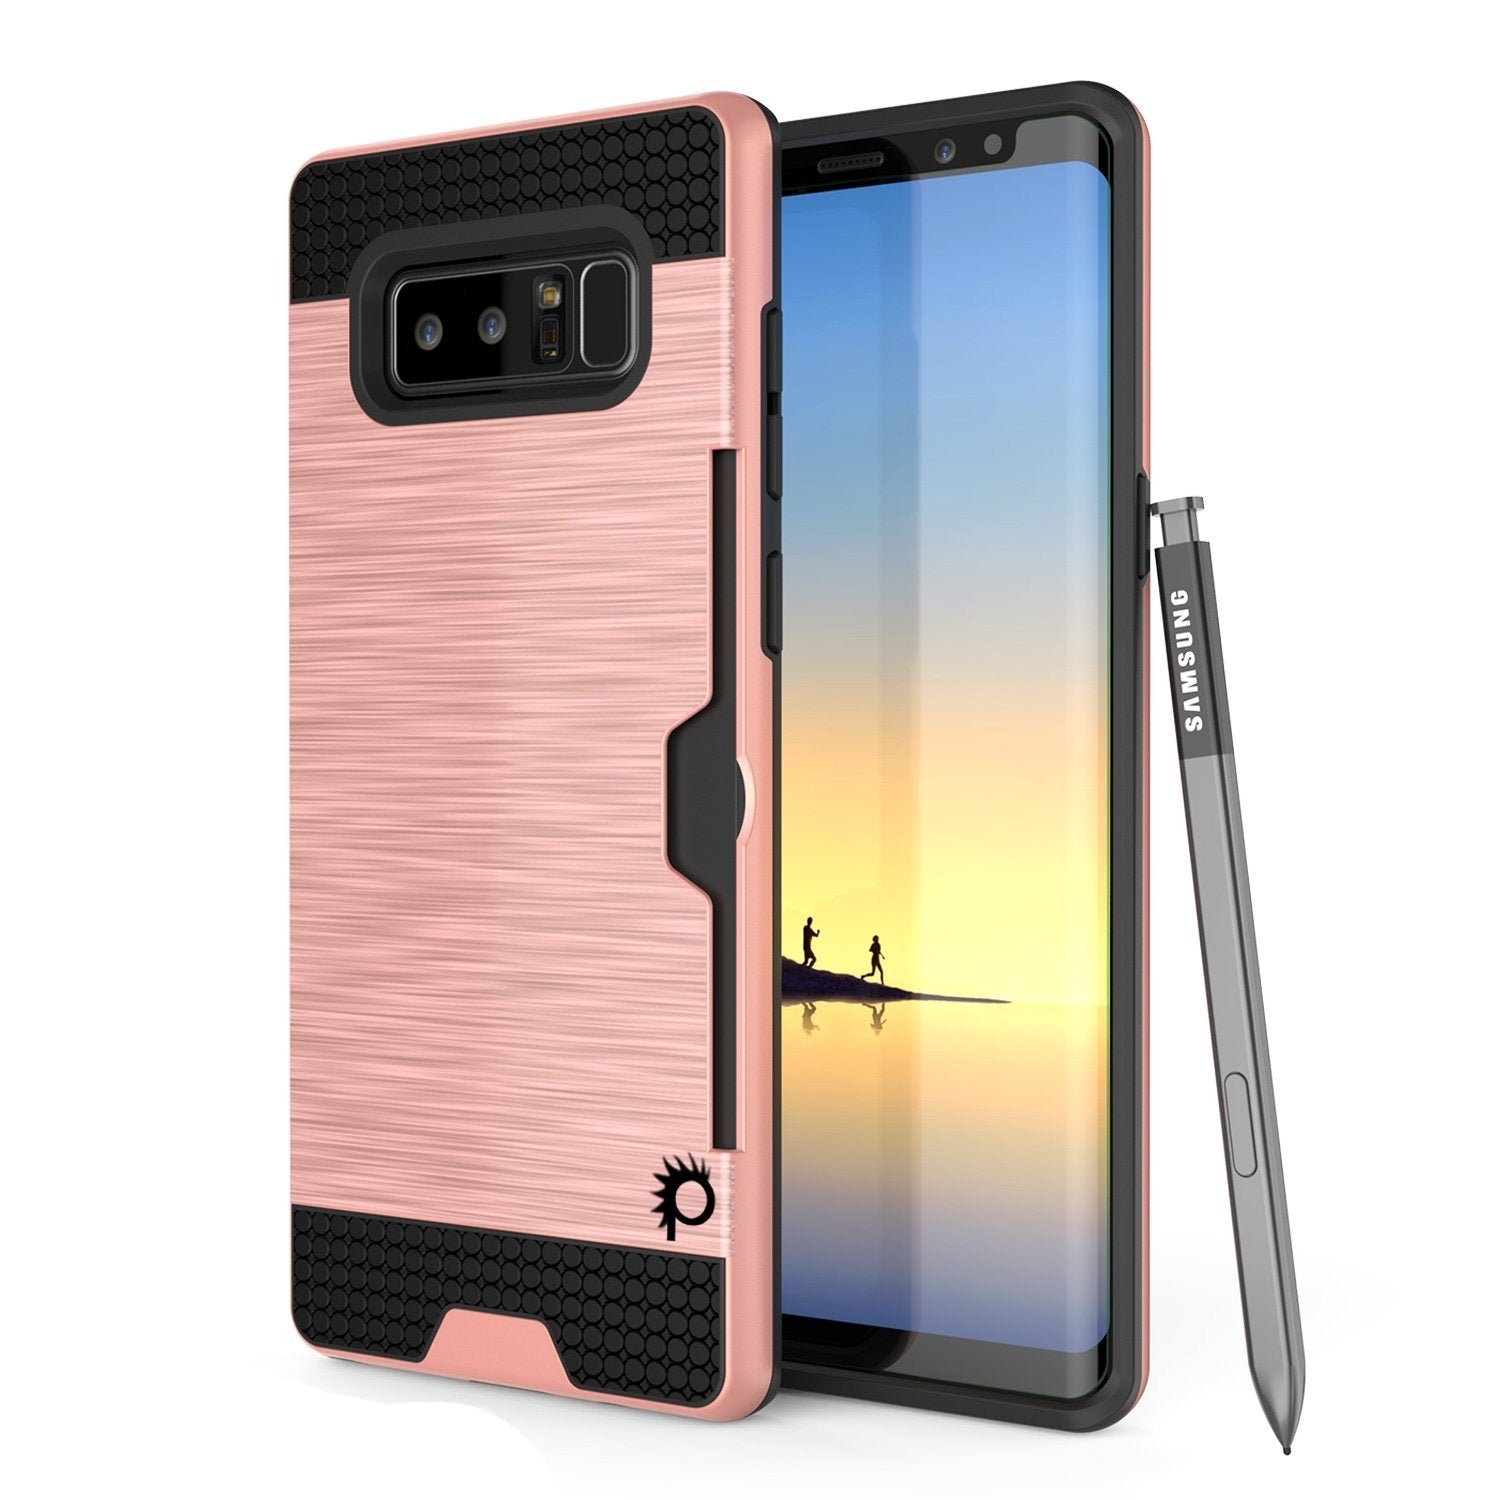 Galaxy Note 8 PunkCase, [SLOT Series] Slim Fit Cover [Navy]